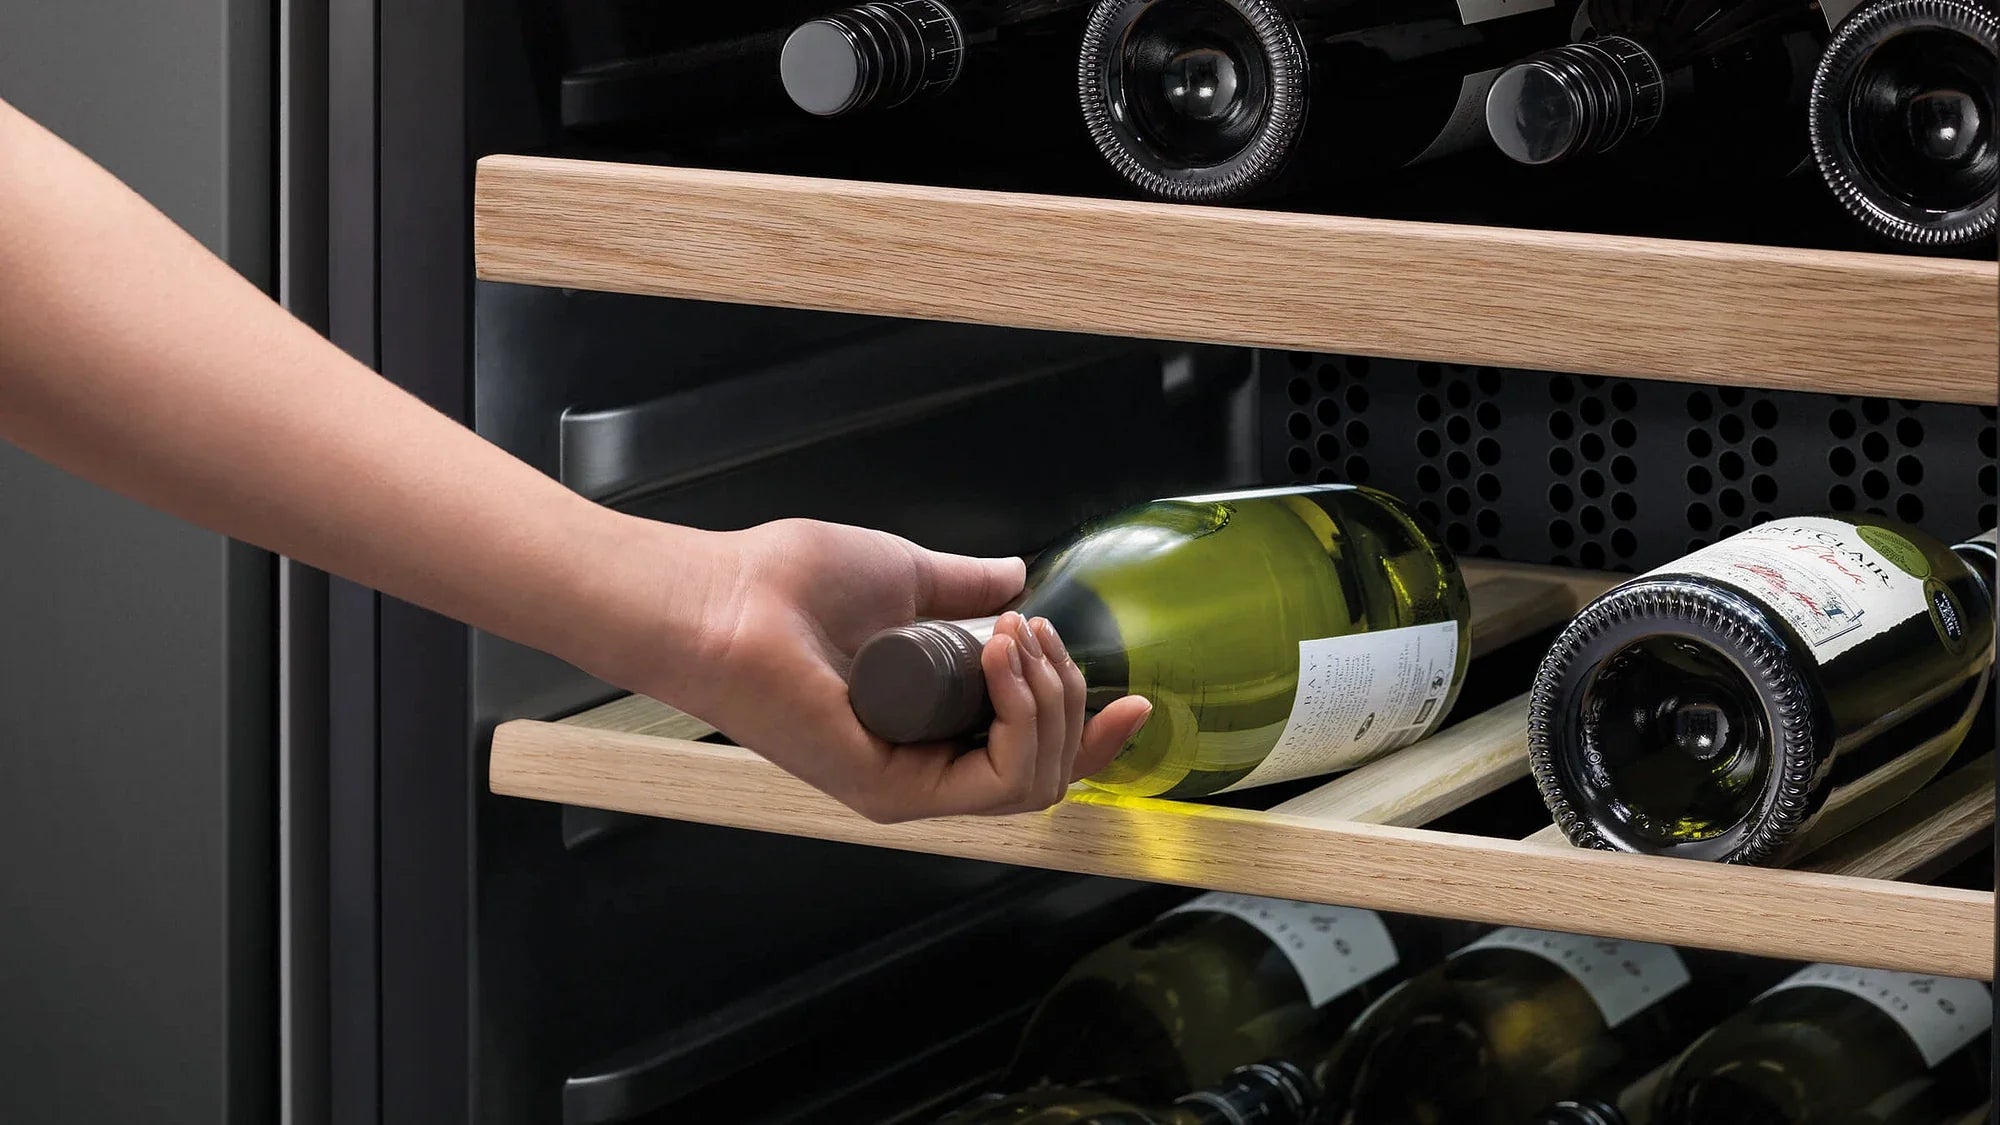 Removing wine from a wine cooler